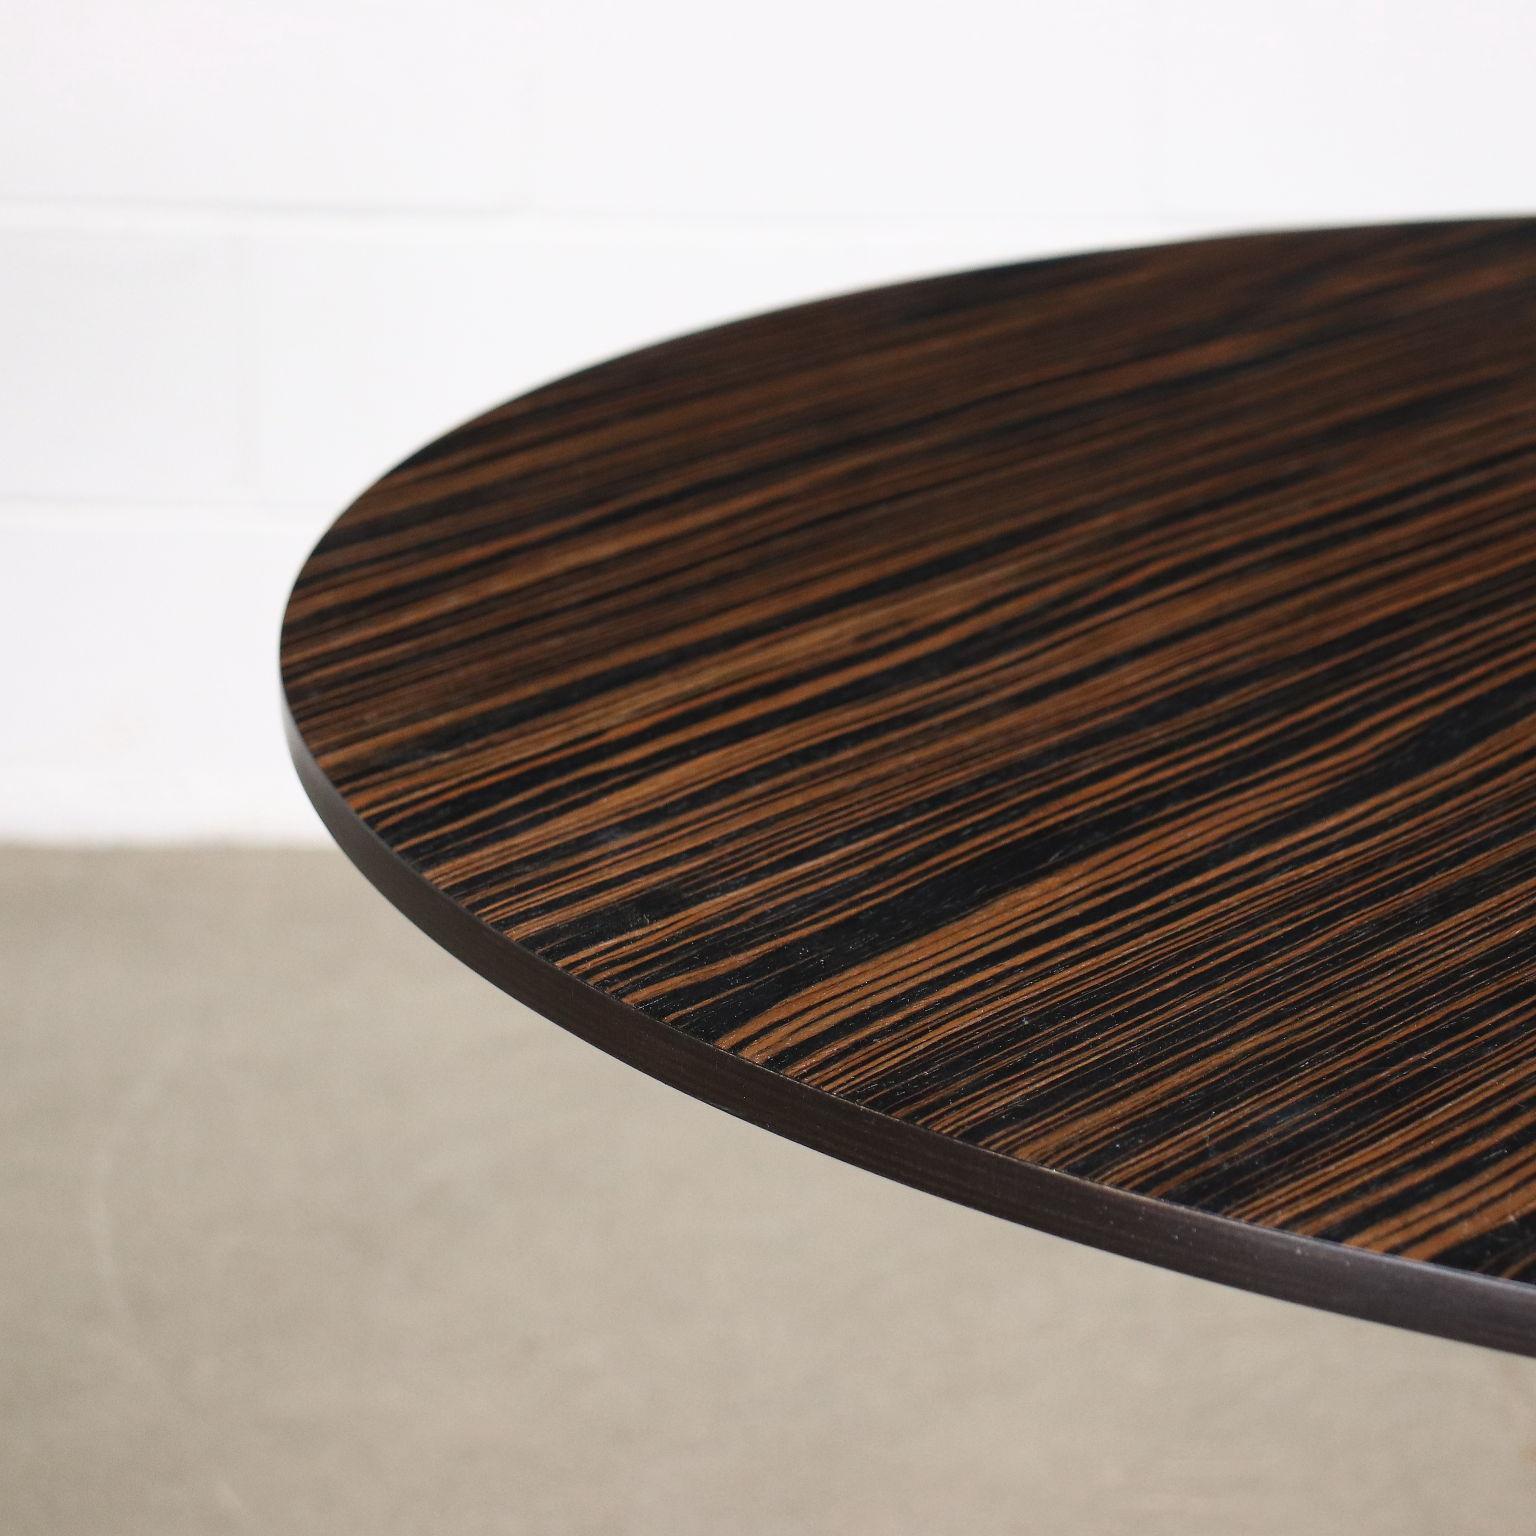 Italian Round Table Tulip Style Lacquered Alluminium Rosewood Italy 1960-1970s For Sale